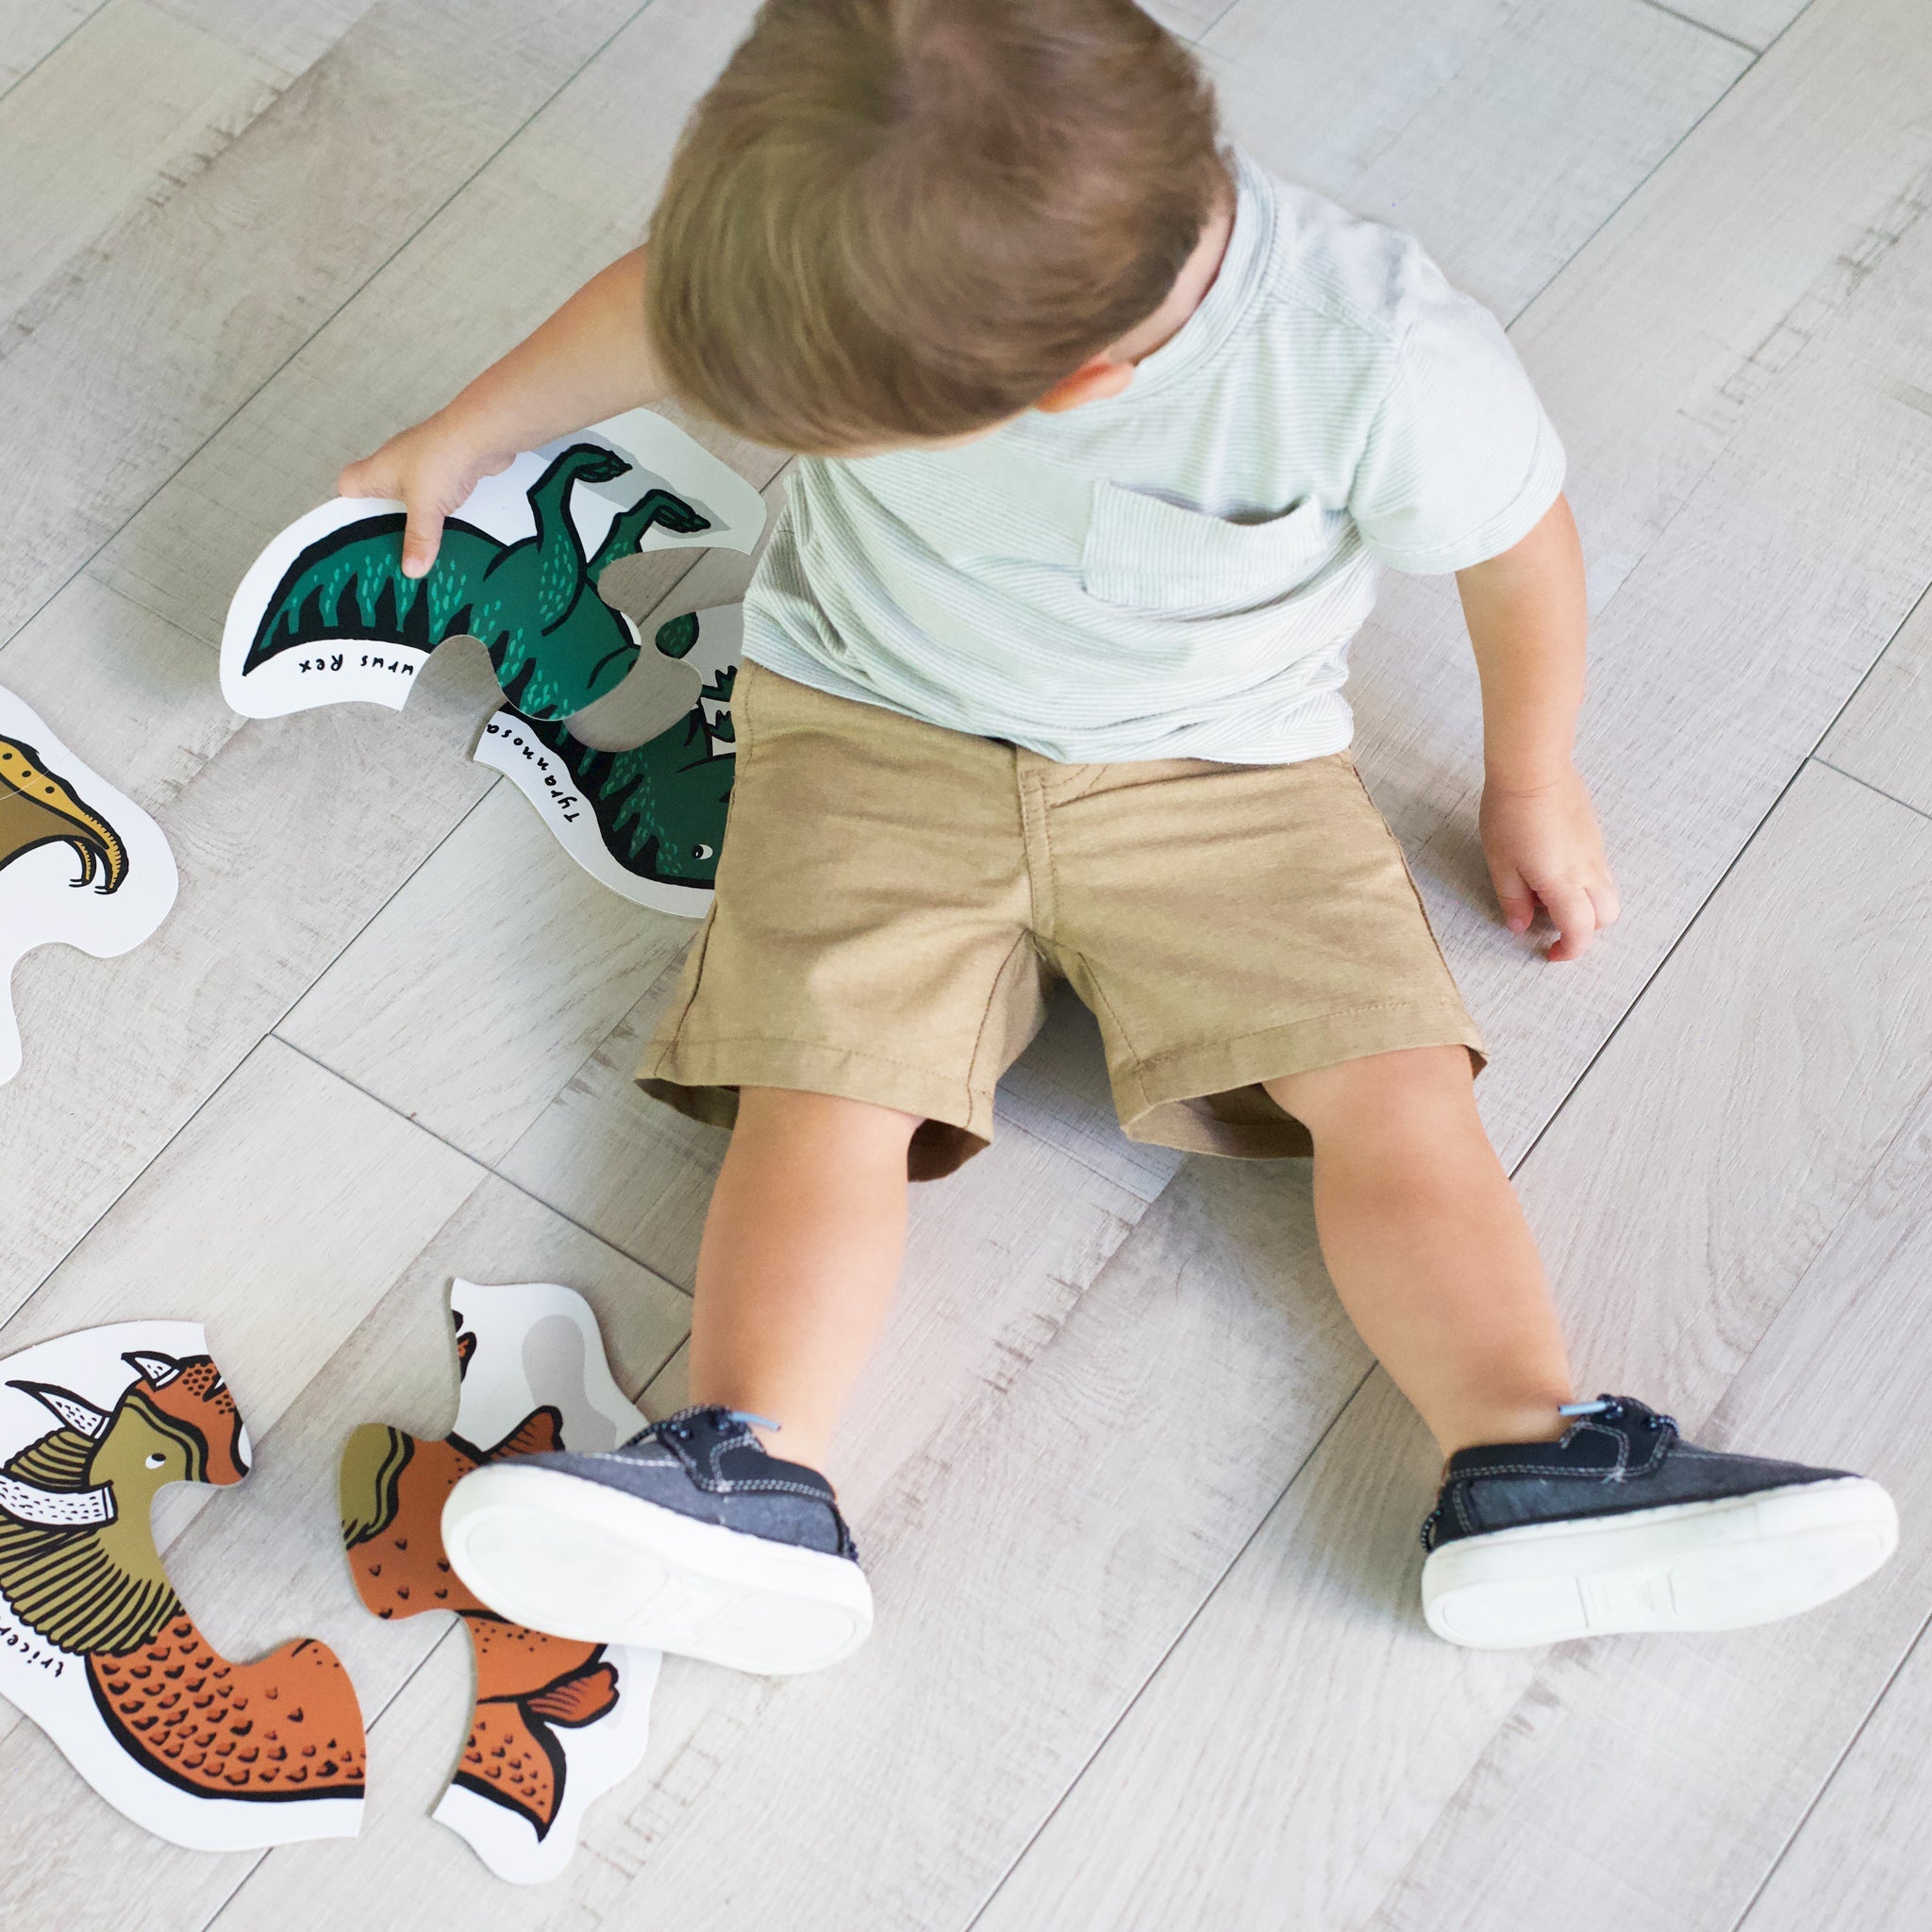 early-child-development-puzzles-for-toddler-STEM-dinosaurs-1.jpg